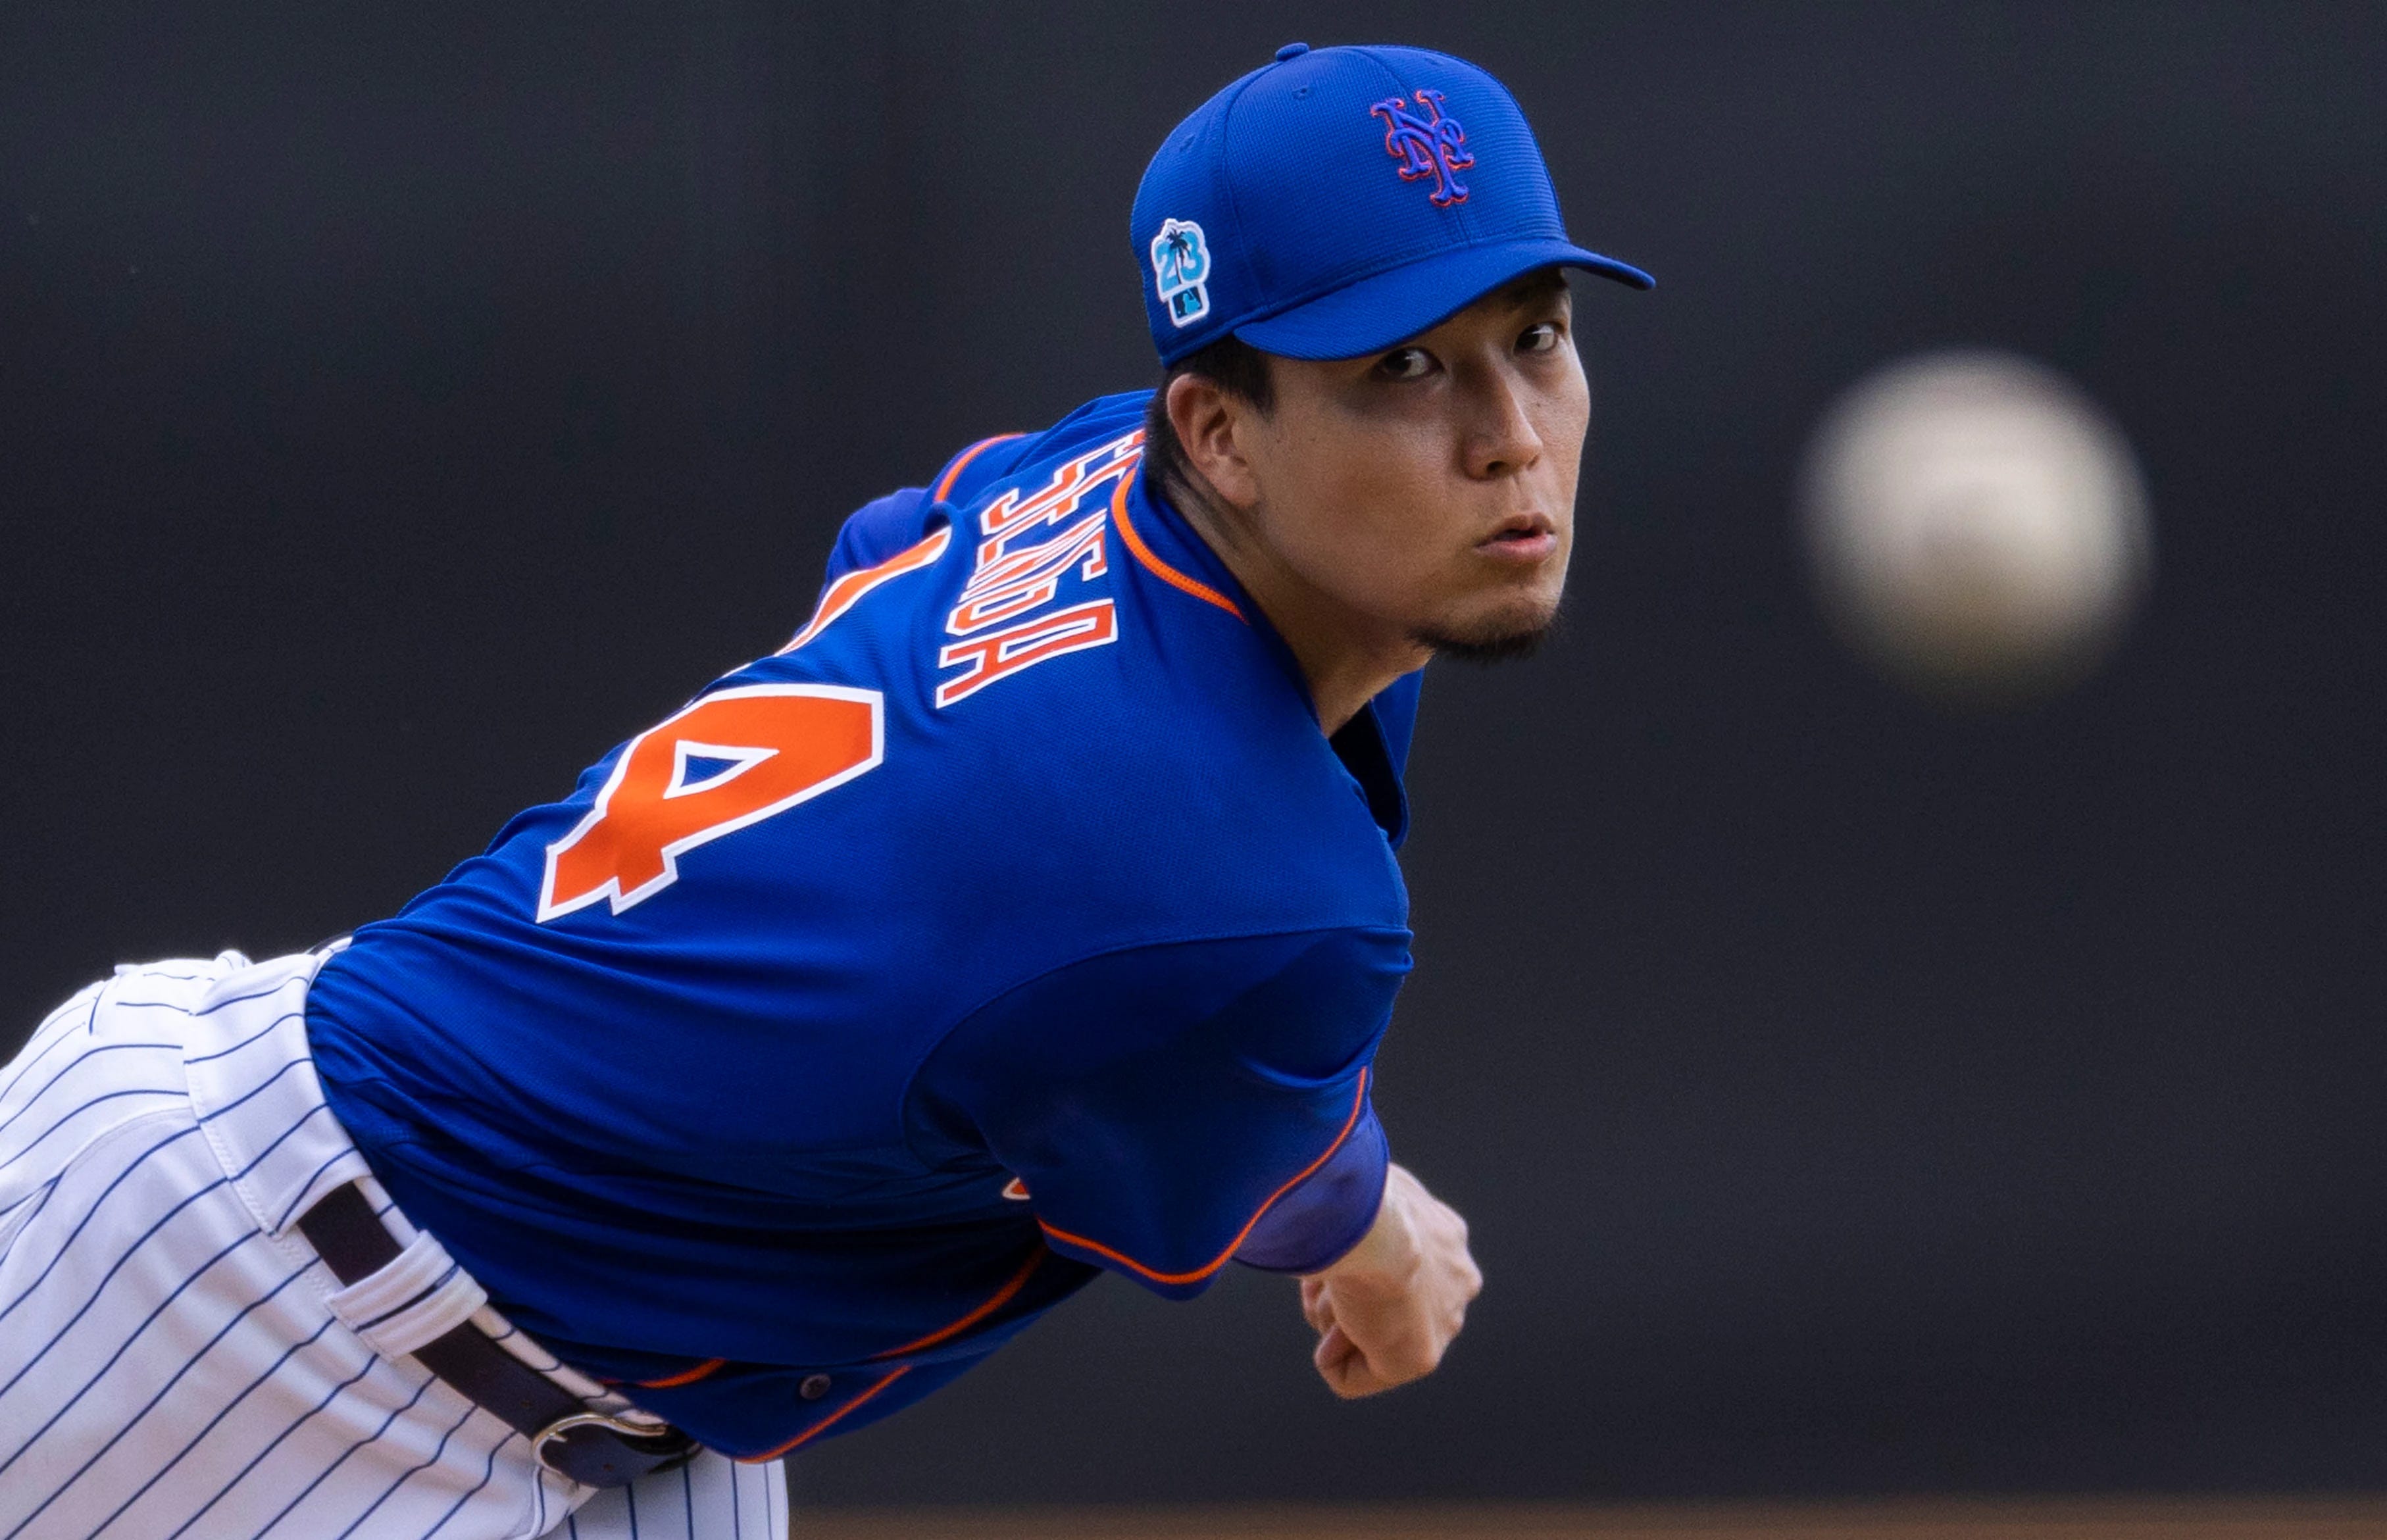 Mets Using Kodai Senga For Early Free Agent Pitch to Ohtani?